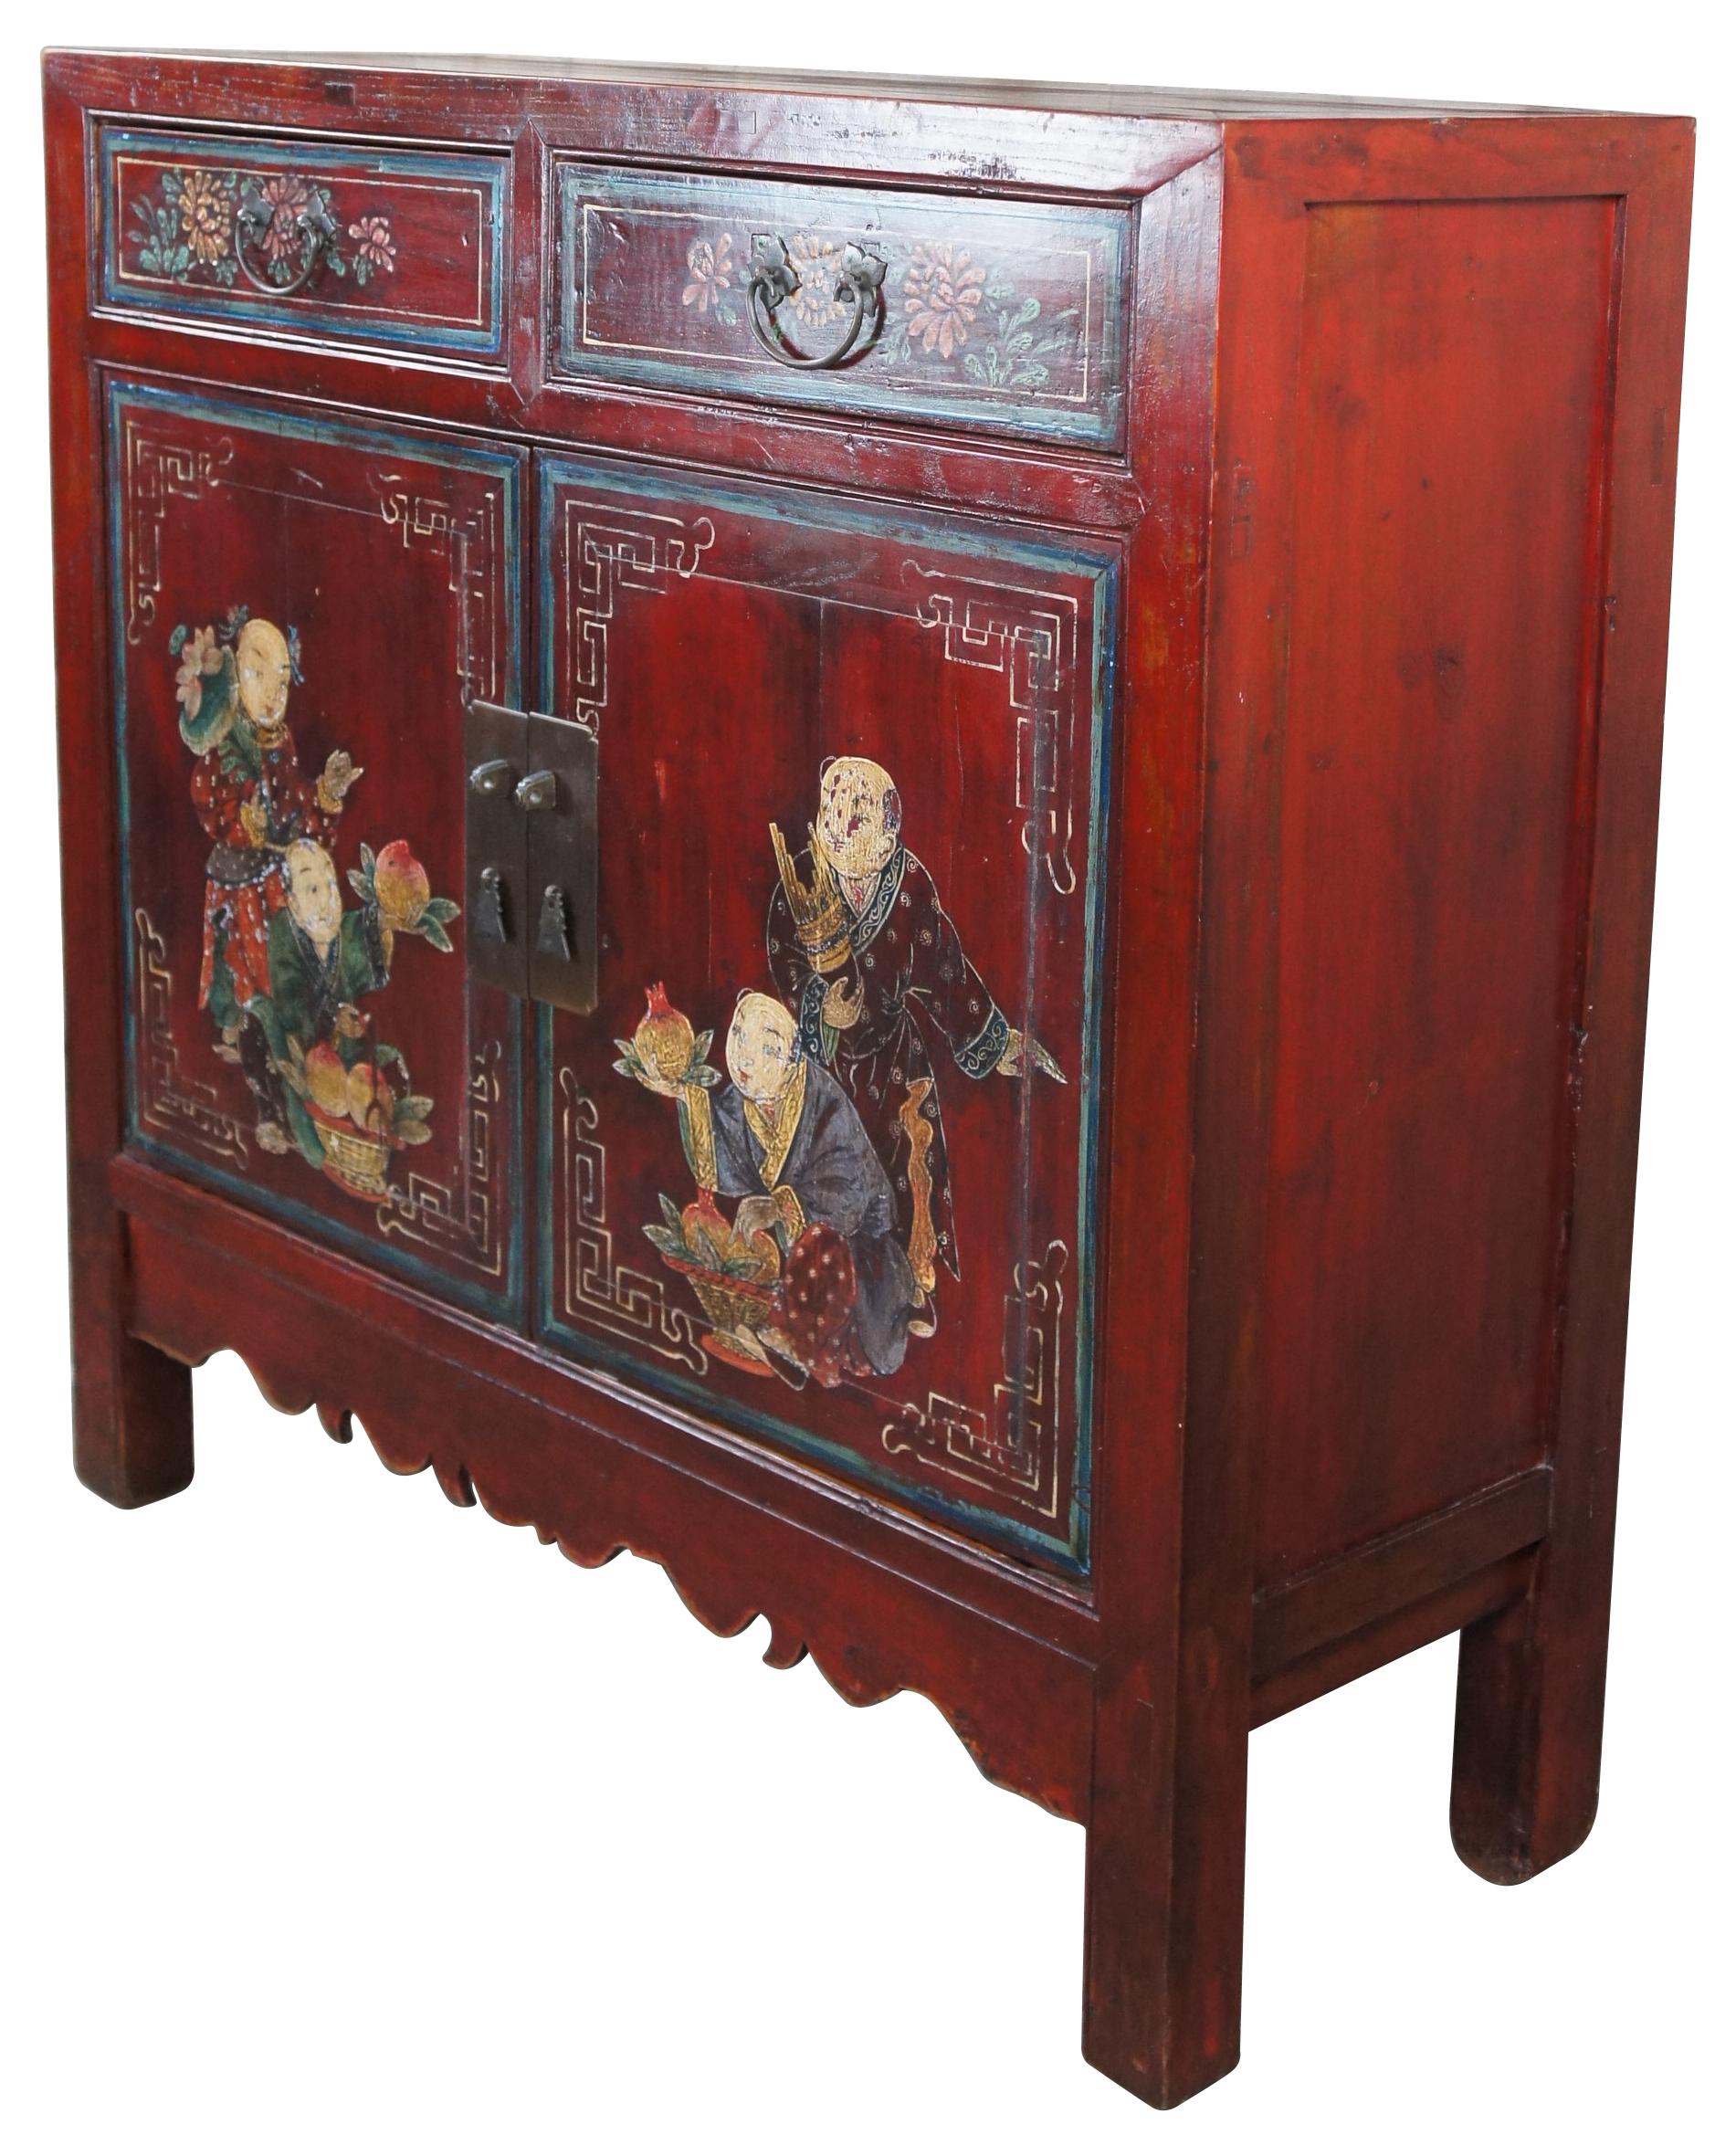 Impressive antique red lacquer Qing Dynasty cabinet. A rectangular form made from elm with mortise and tenon construction and lower serpentine carved apron. Features two dovetailed drawers over lower cabinet with shelf. Each cabinet drawer and door